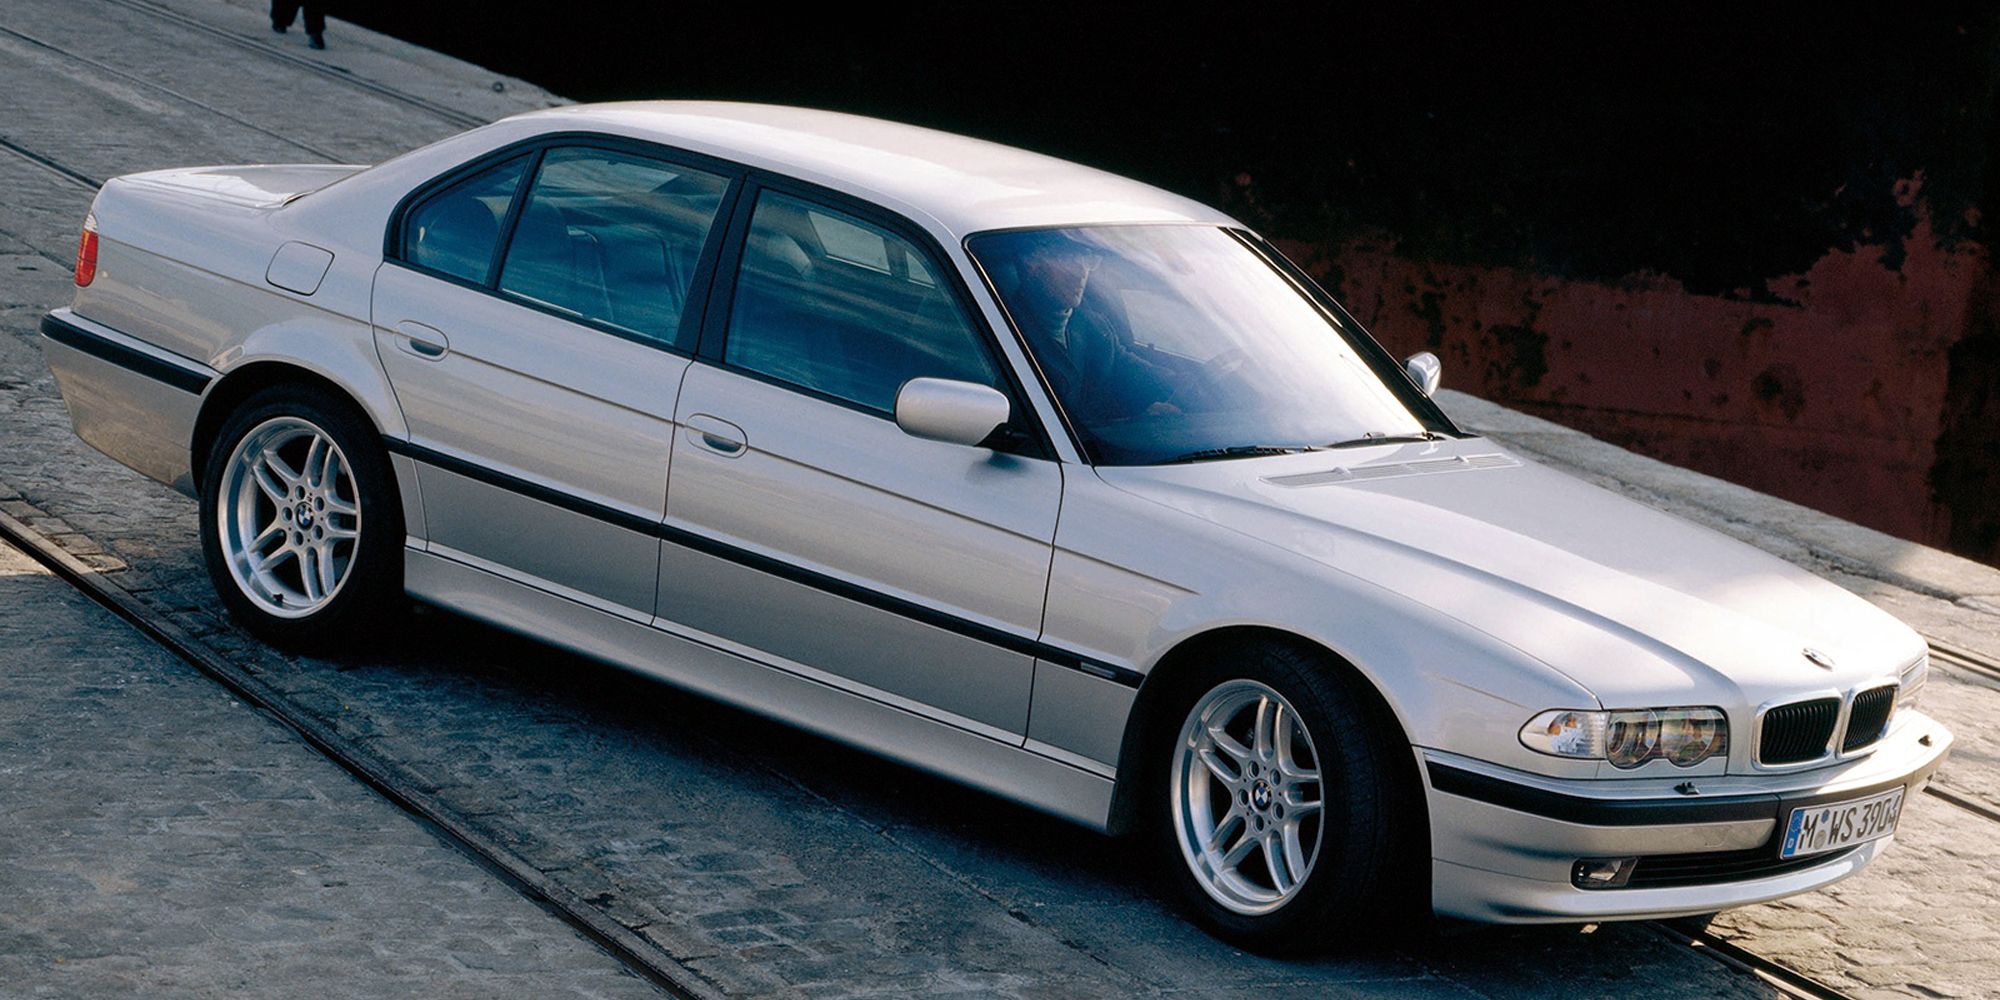 Front 3/4 view of the E38 BMW 7 Series